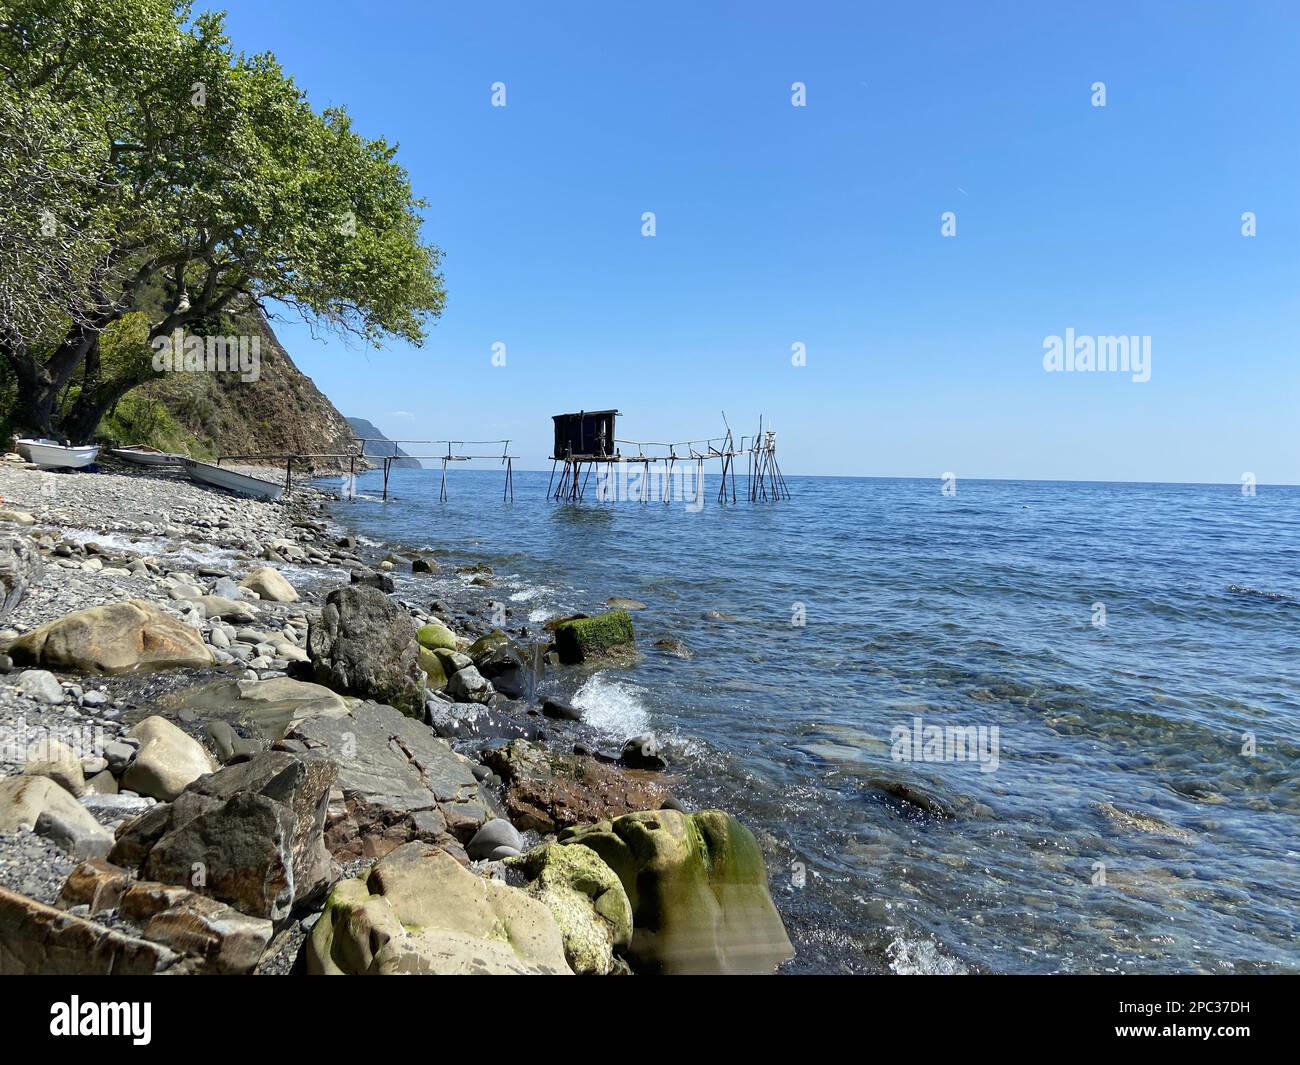 Wooden abandoned stilt tower house fisherman cave on diy pier on the rocky coast shores of fishing village on sunny summer day bright blue skies Stock Photo